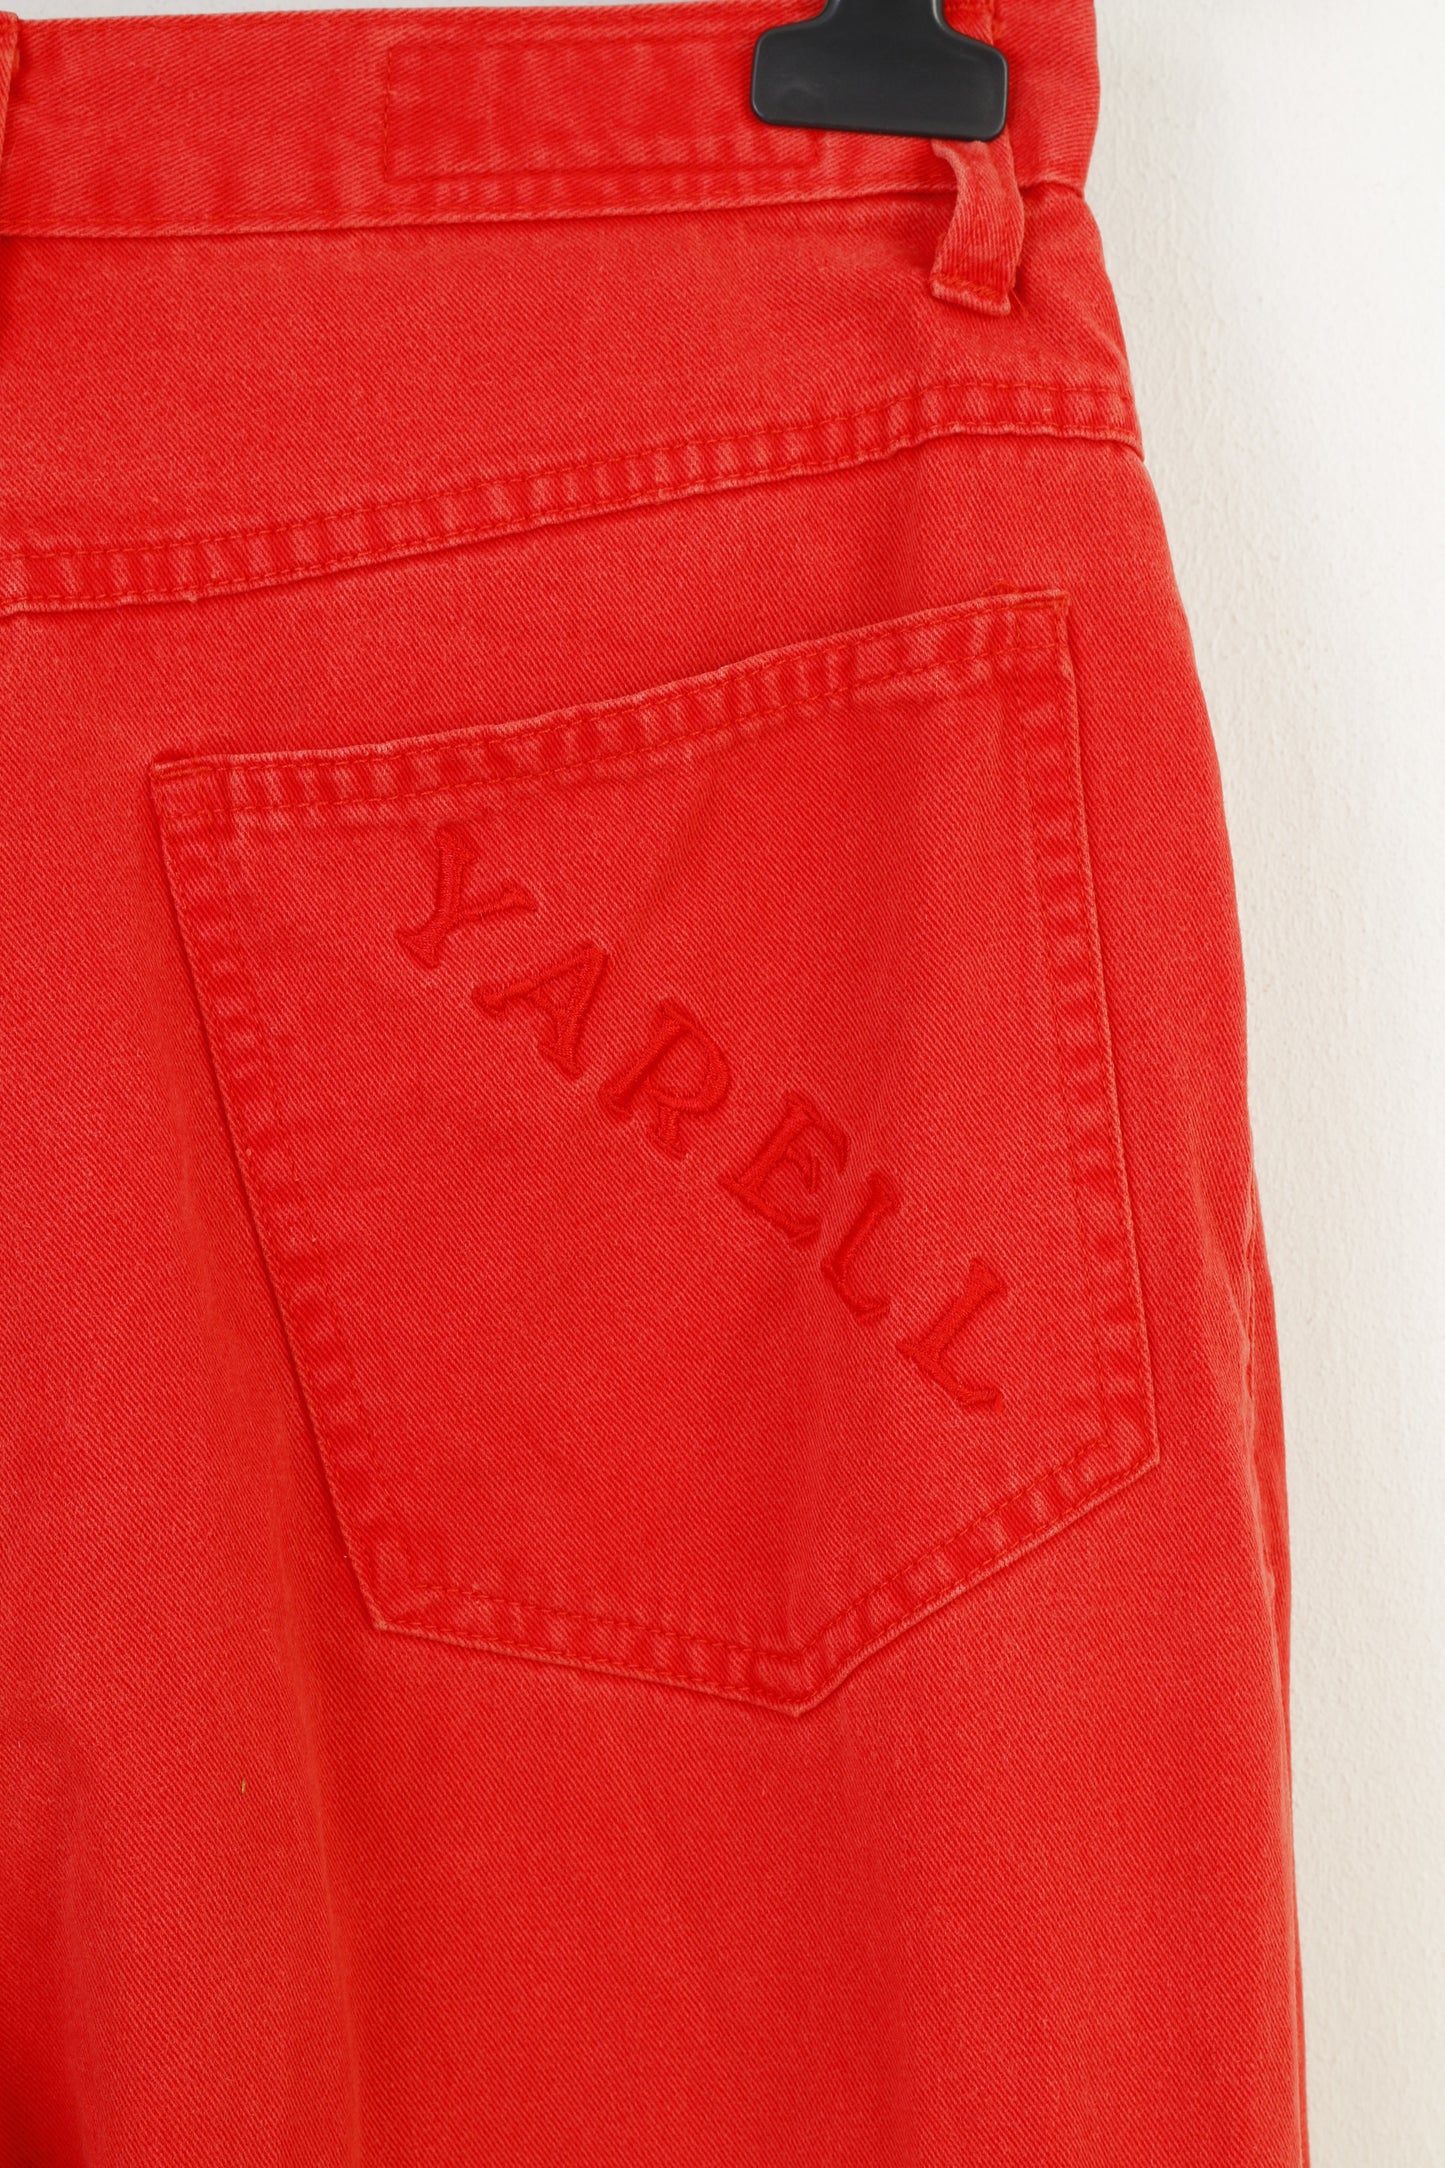 Yarell Women 12 40 Trousers Red Cotton Vintage Jeans Pants